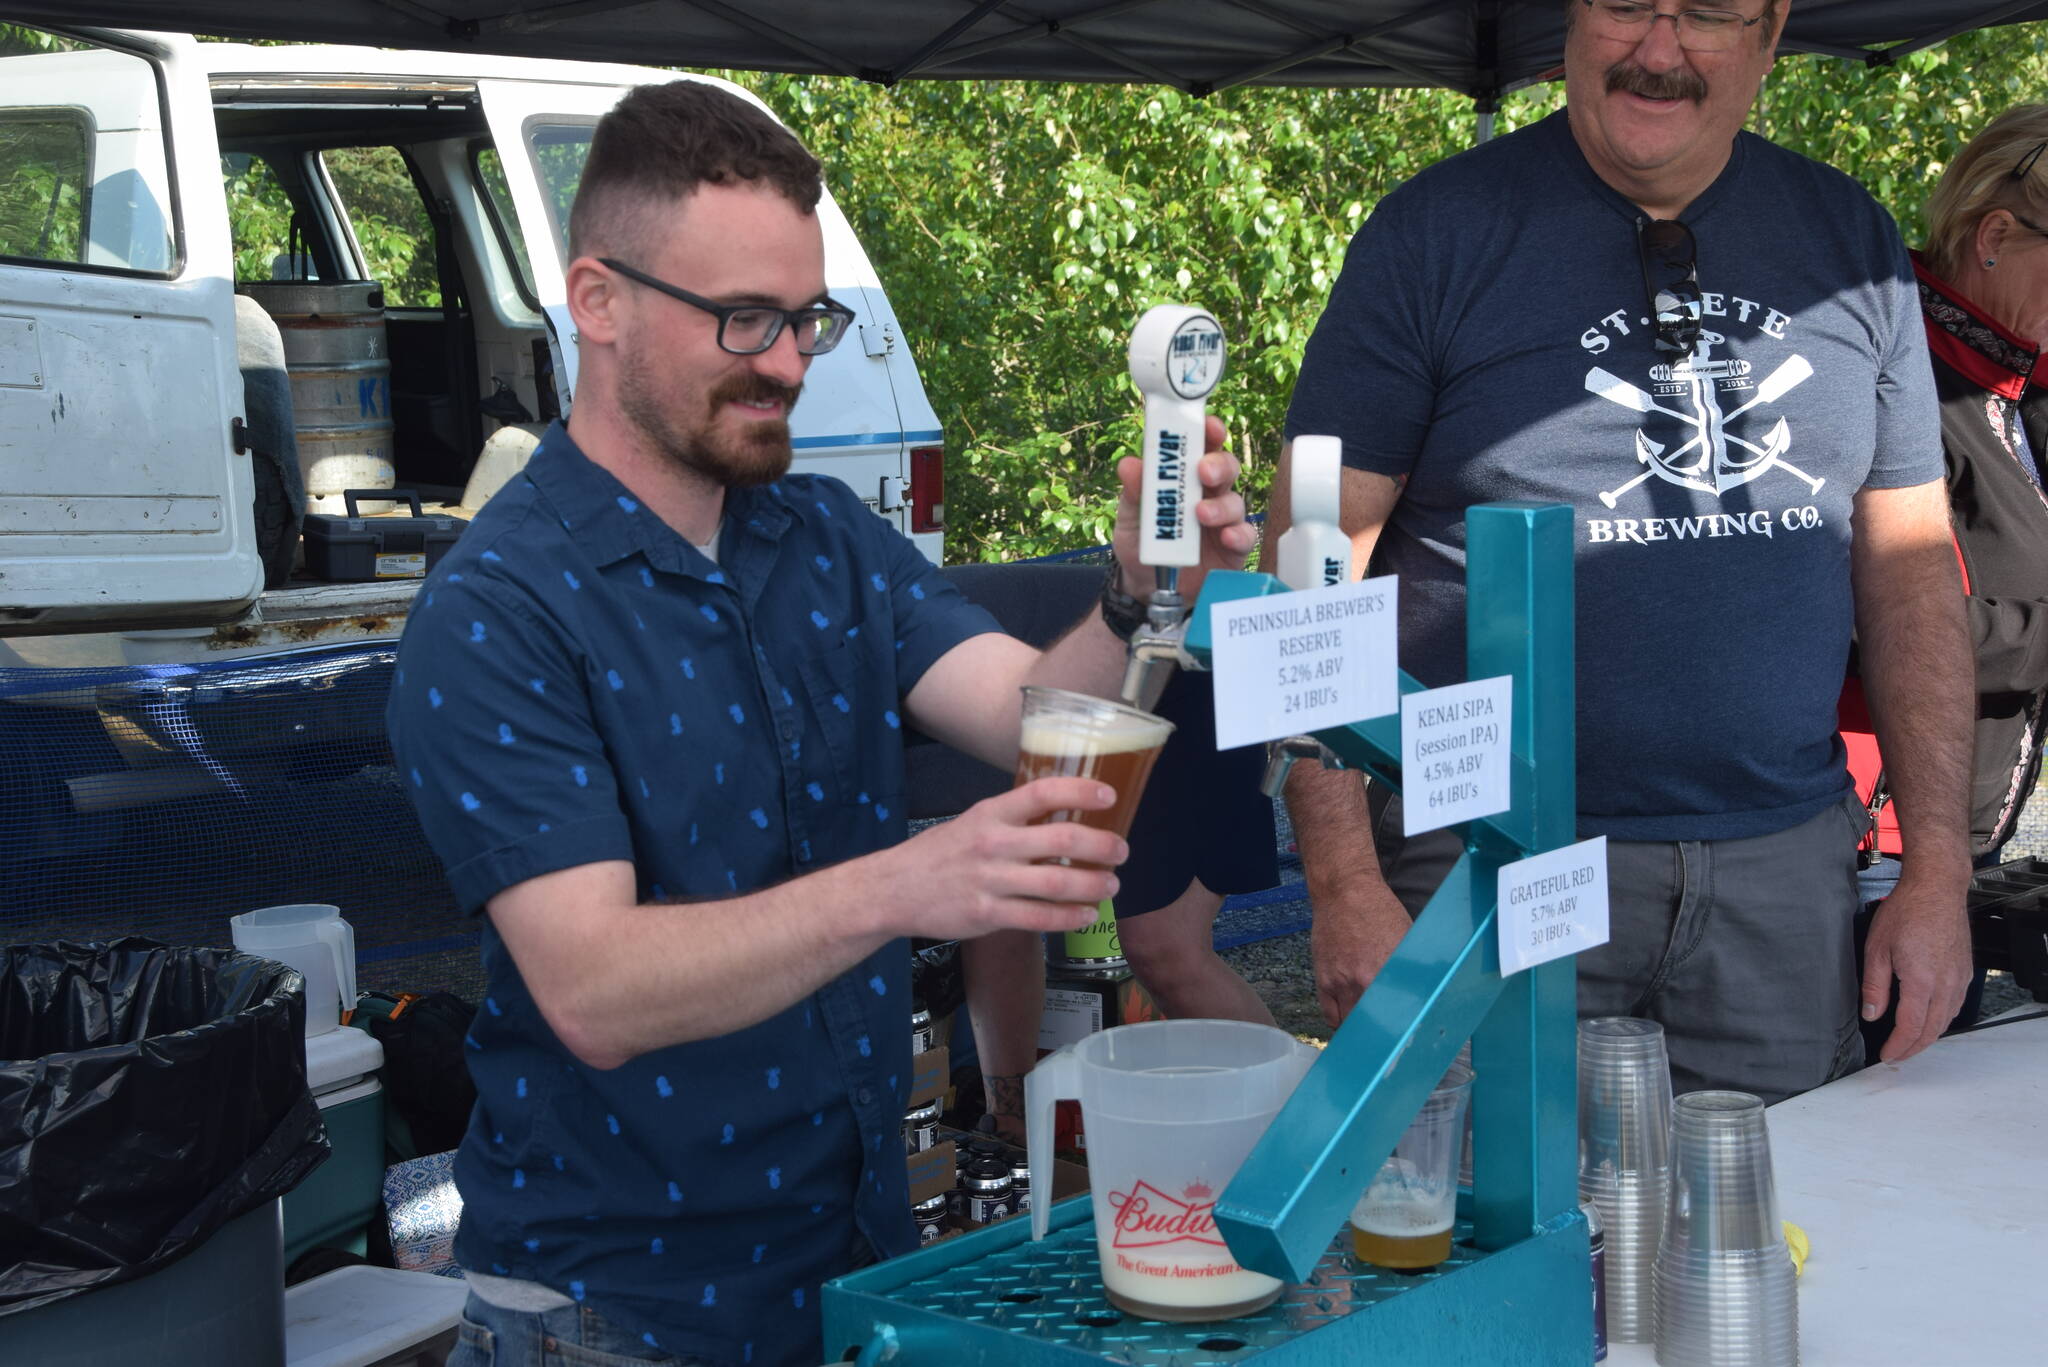 Ben Weagraff from Kenai River Brewing Company works the beer garden at Soldotna Creek Park during the Levitt AMP Soldotna Music Series on Wednesday, June 12, 2019. (Photo by Brian Mazurek/Peninsula Clarion)